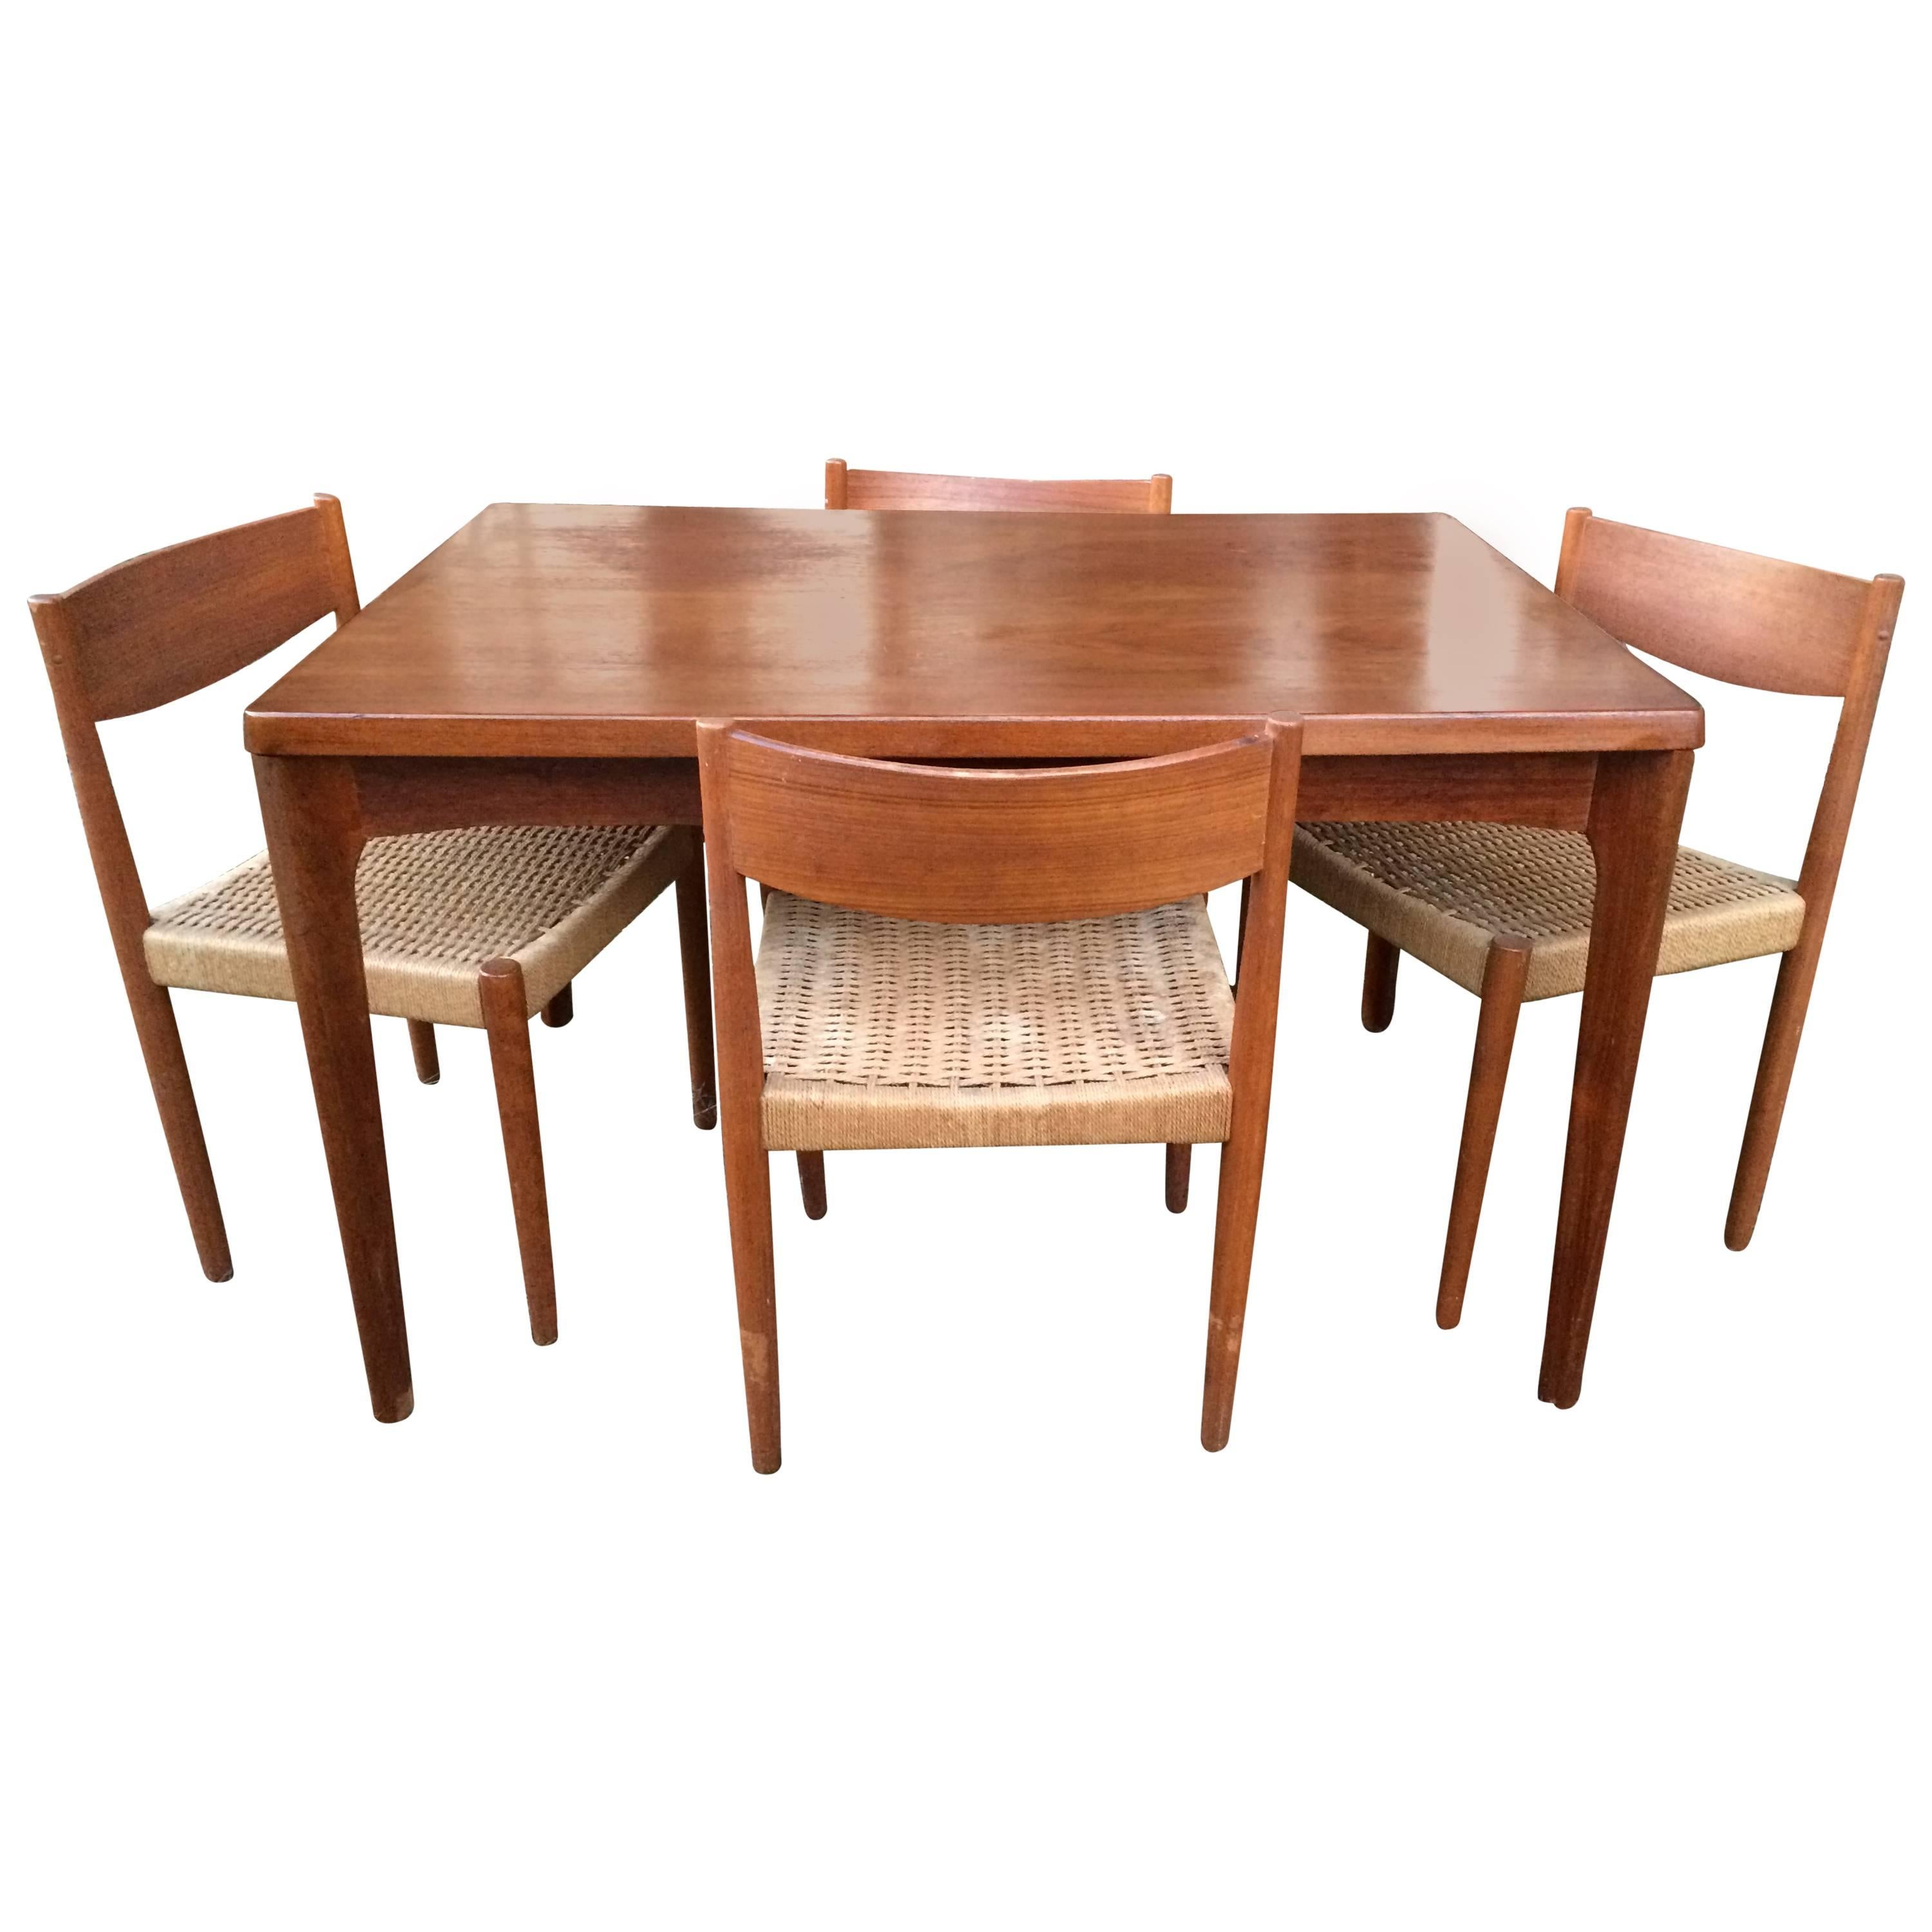 Danish Modern Extendable Teak Dining Table with Woven Chairs